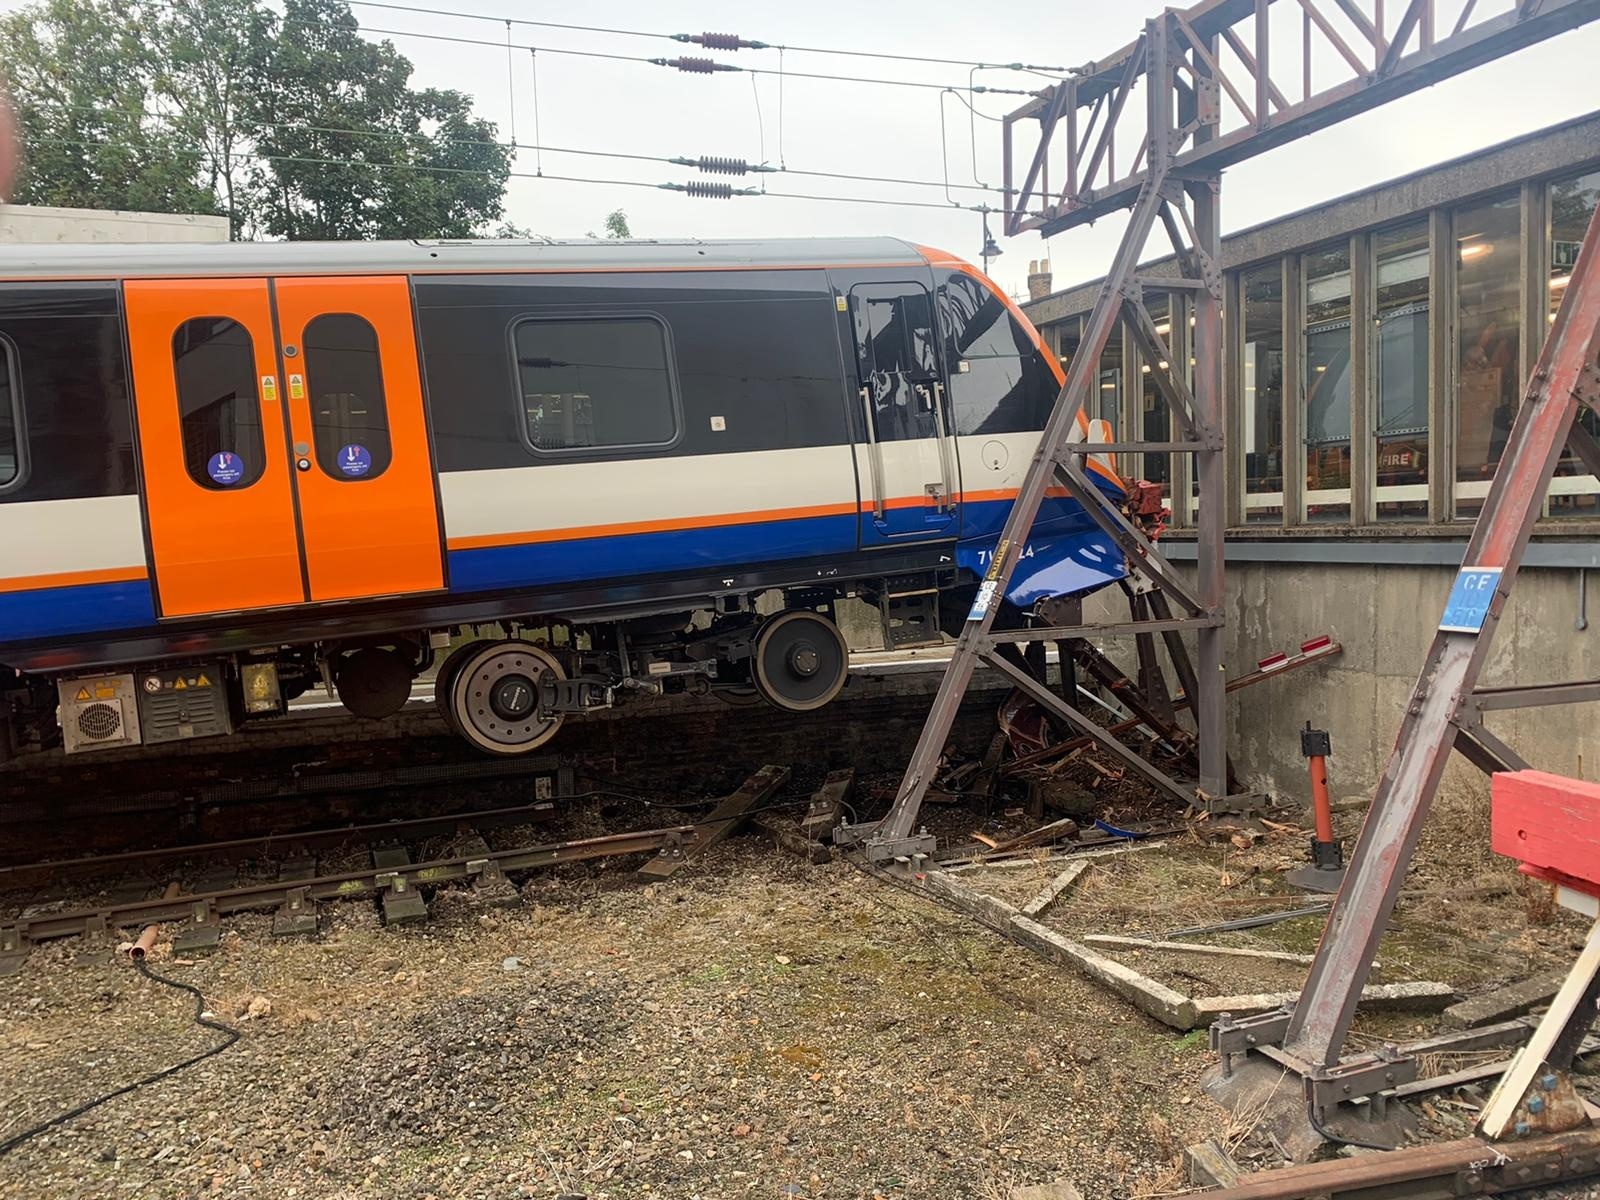 Train crashes through buffers injuring two people